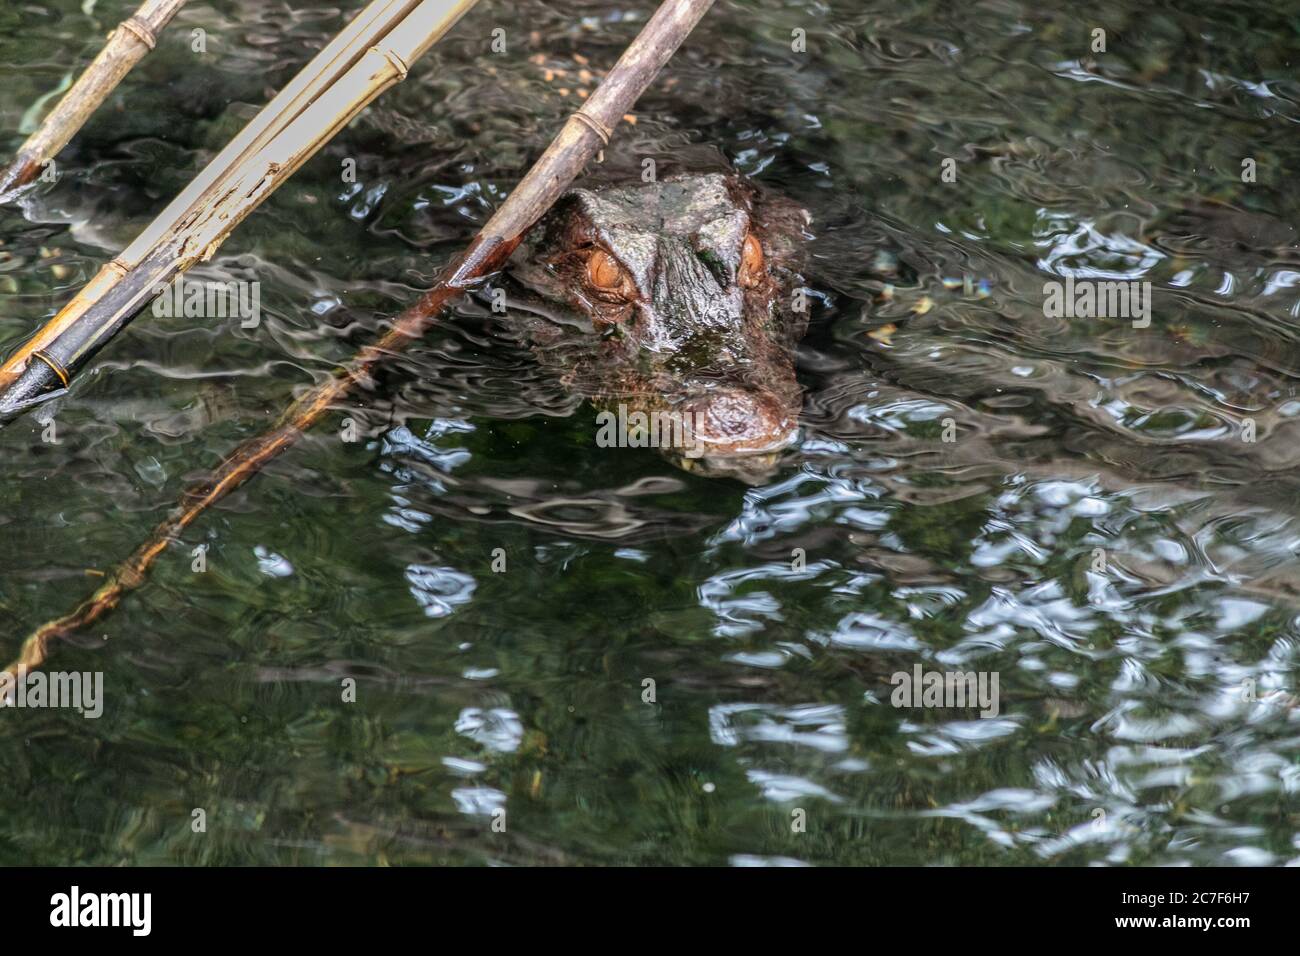 Alligator in a lake surrounded by tree branches and leaves under the sunlight during daytime Stock Photo